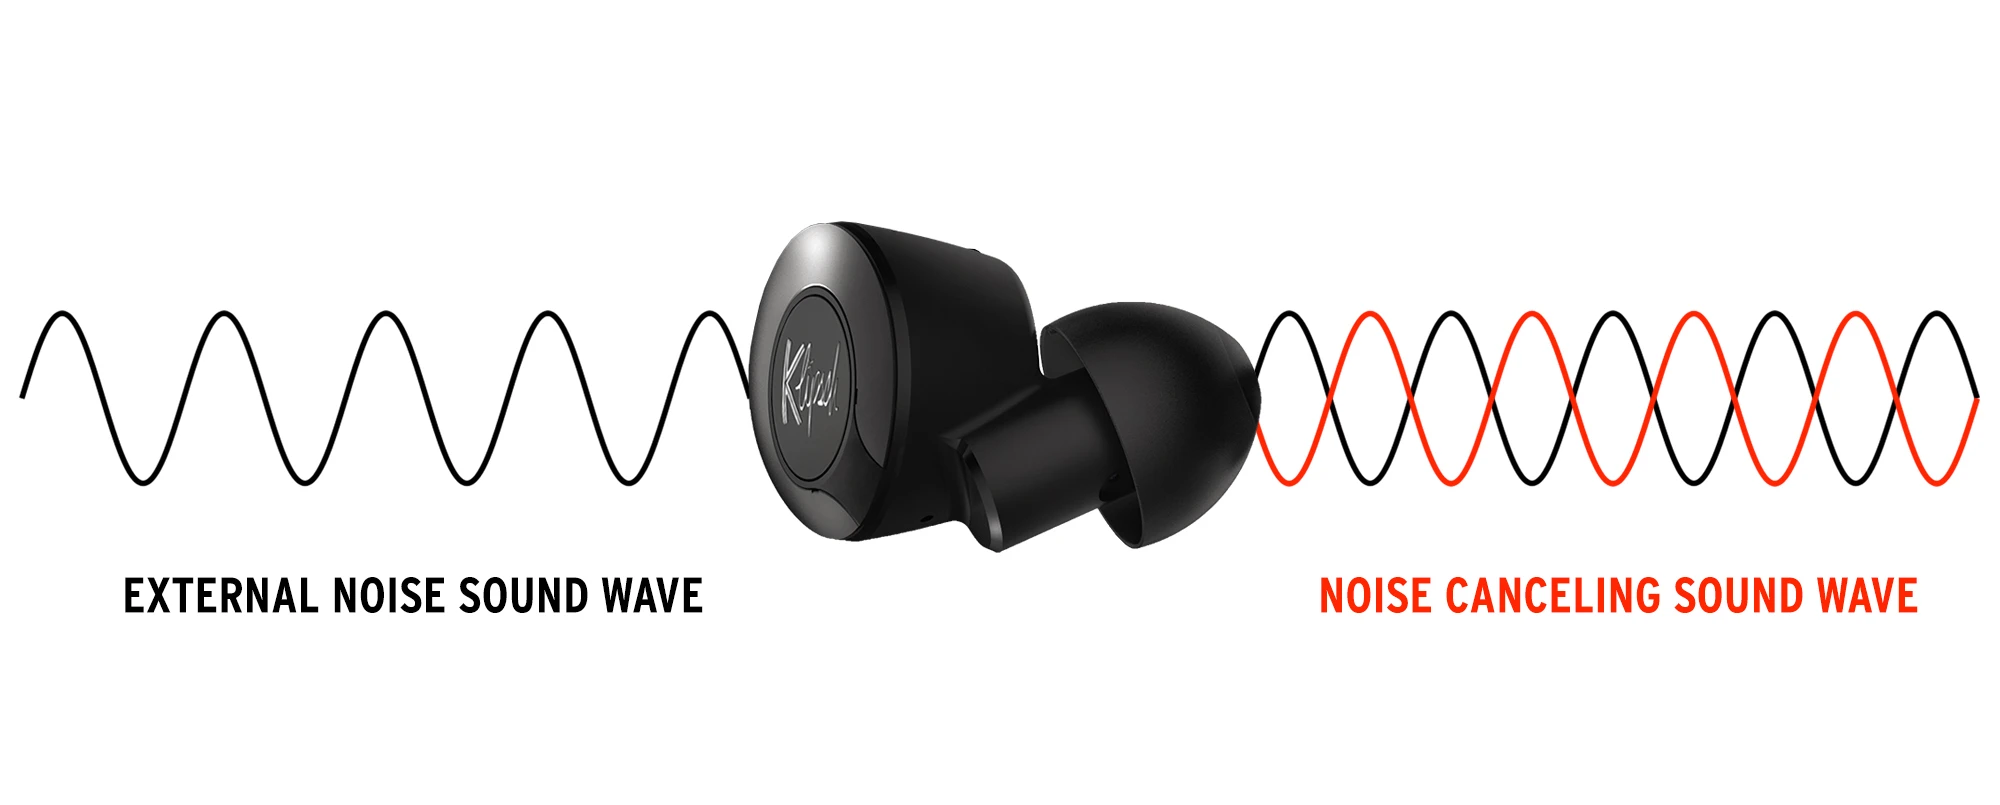 How Does Active Noise Canceling Work?